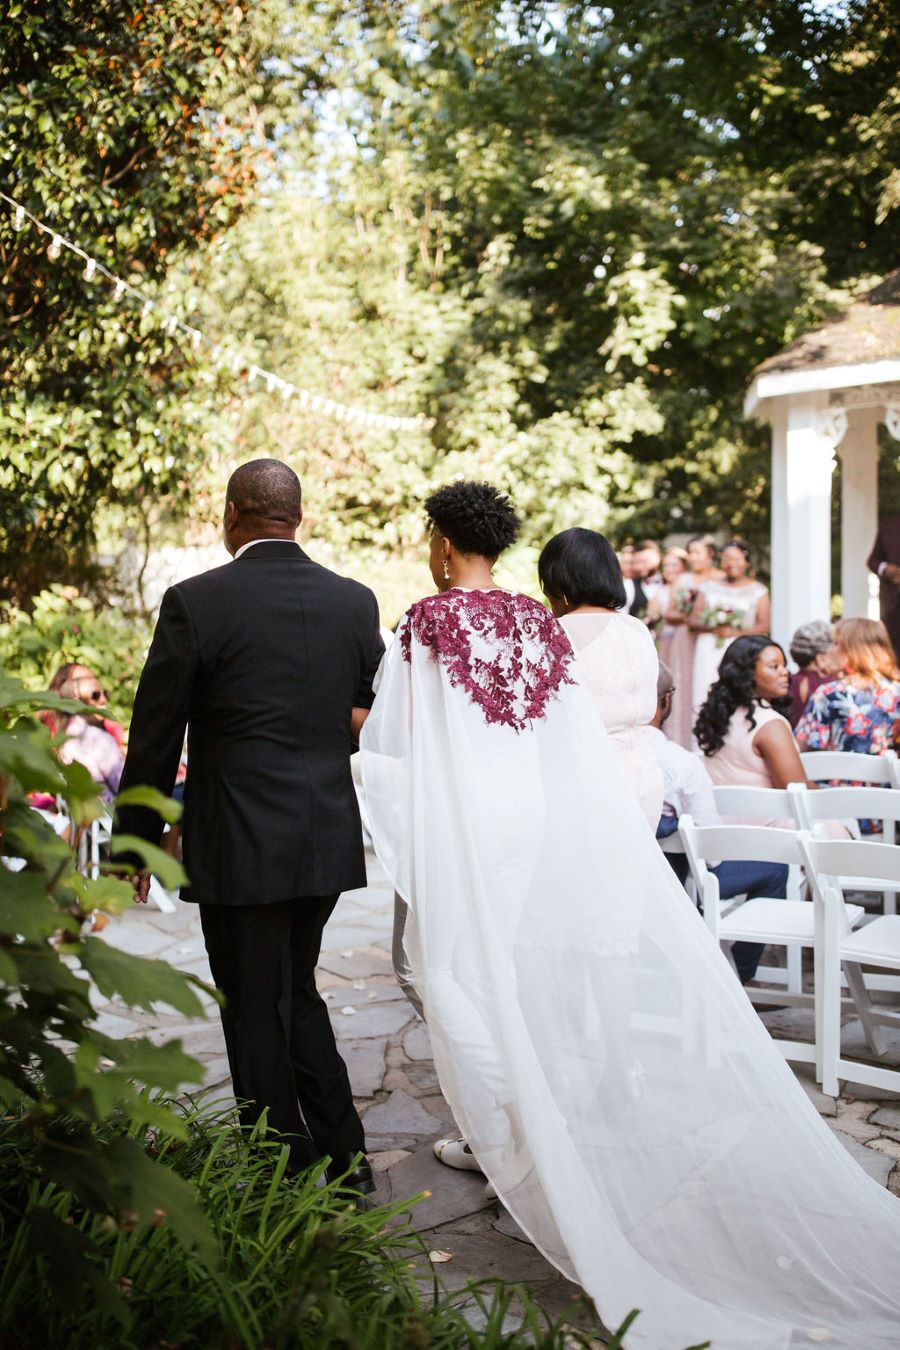 Bride's cape trailing behind her as she walks to the altar / romantic lgbtq / fall / September / blush / burgundy